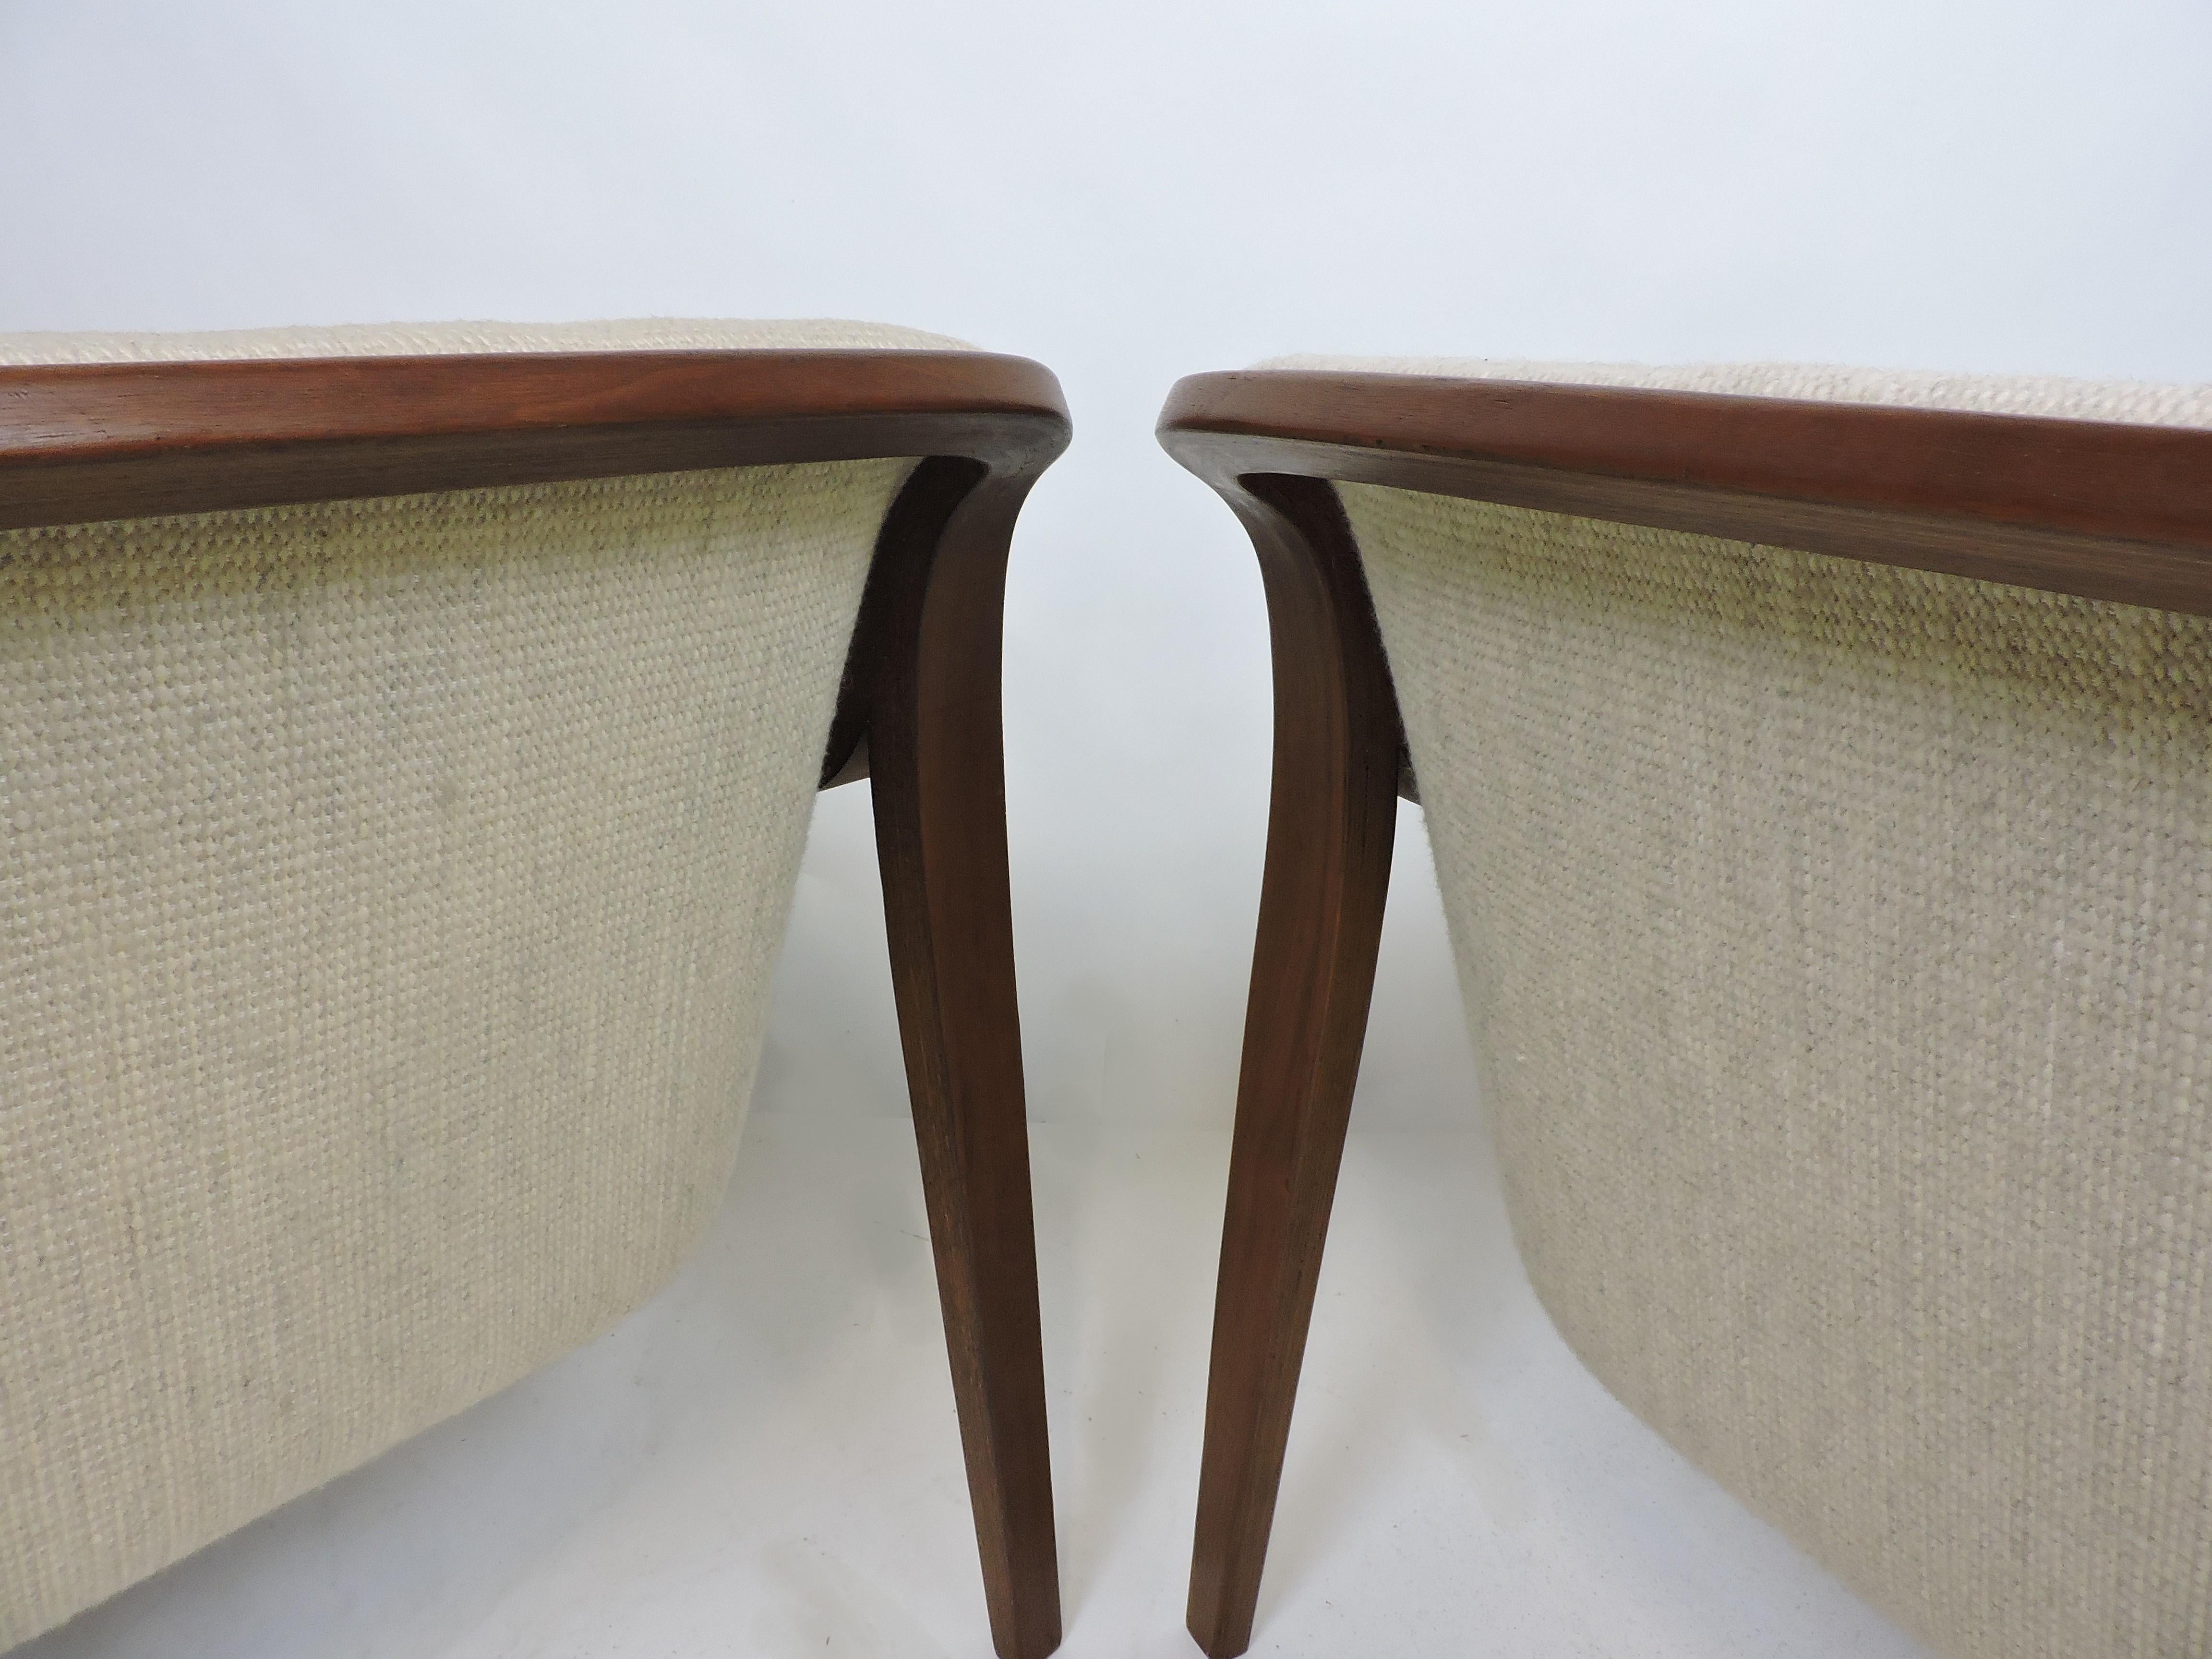 Pair of Bill Stephens Mid-Century Modern Bentwood Lounge Chairs for Knoll 5